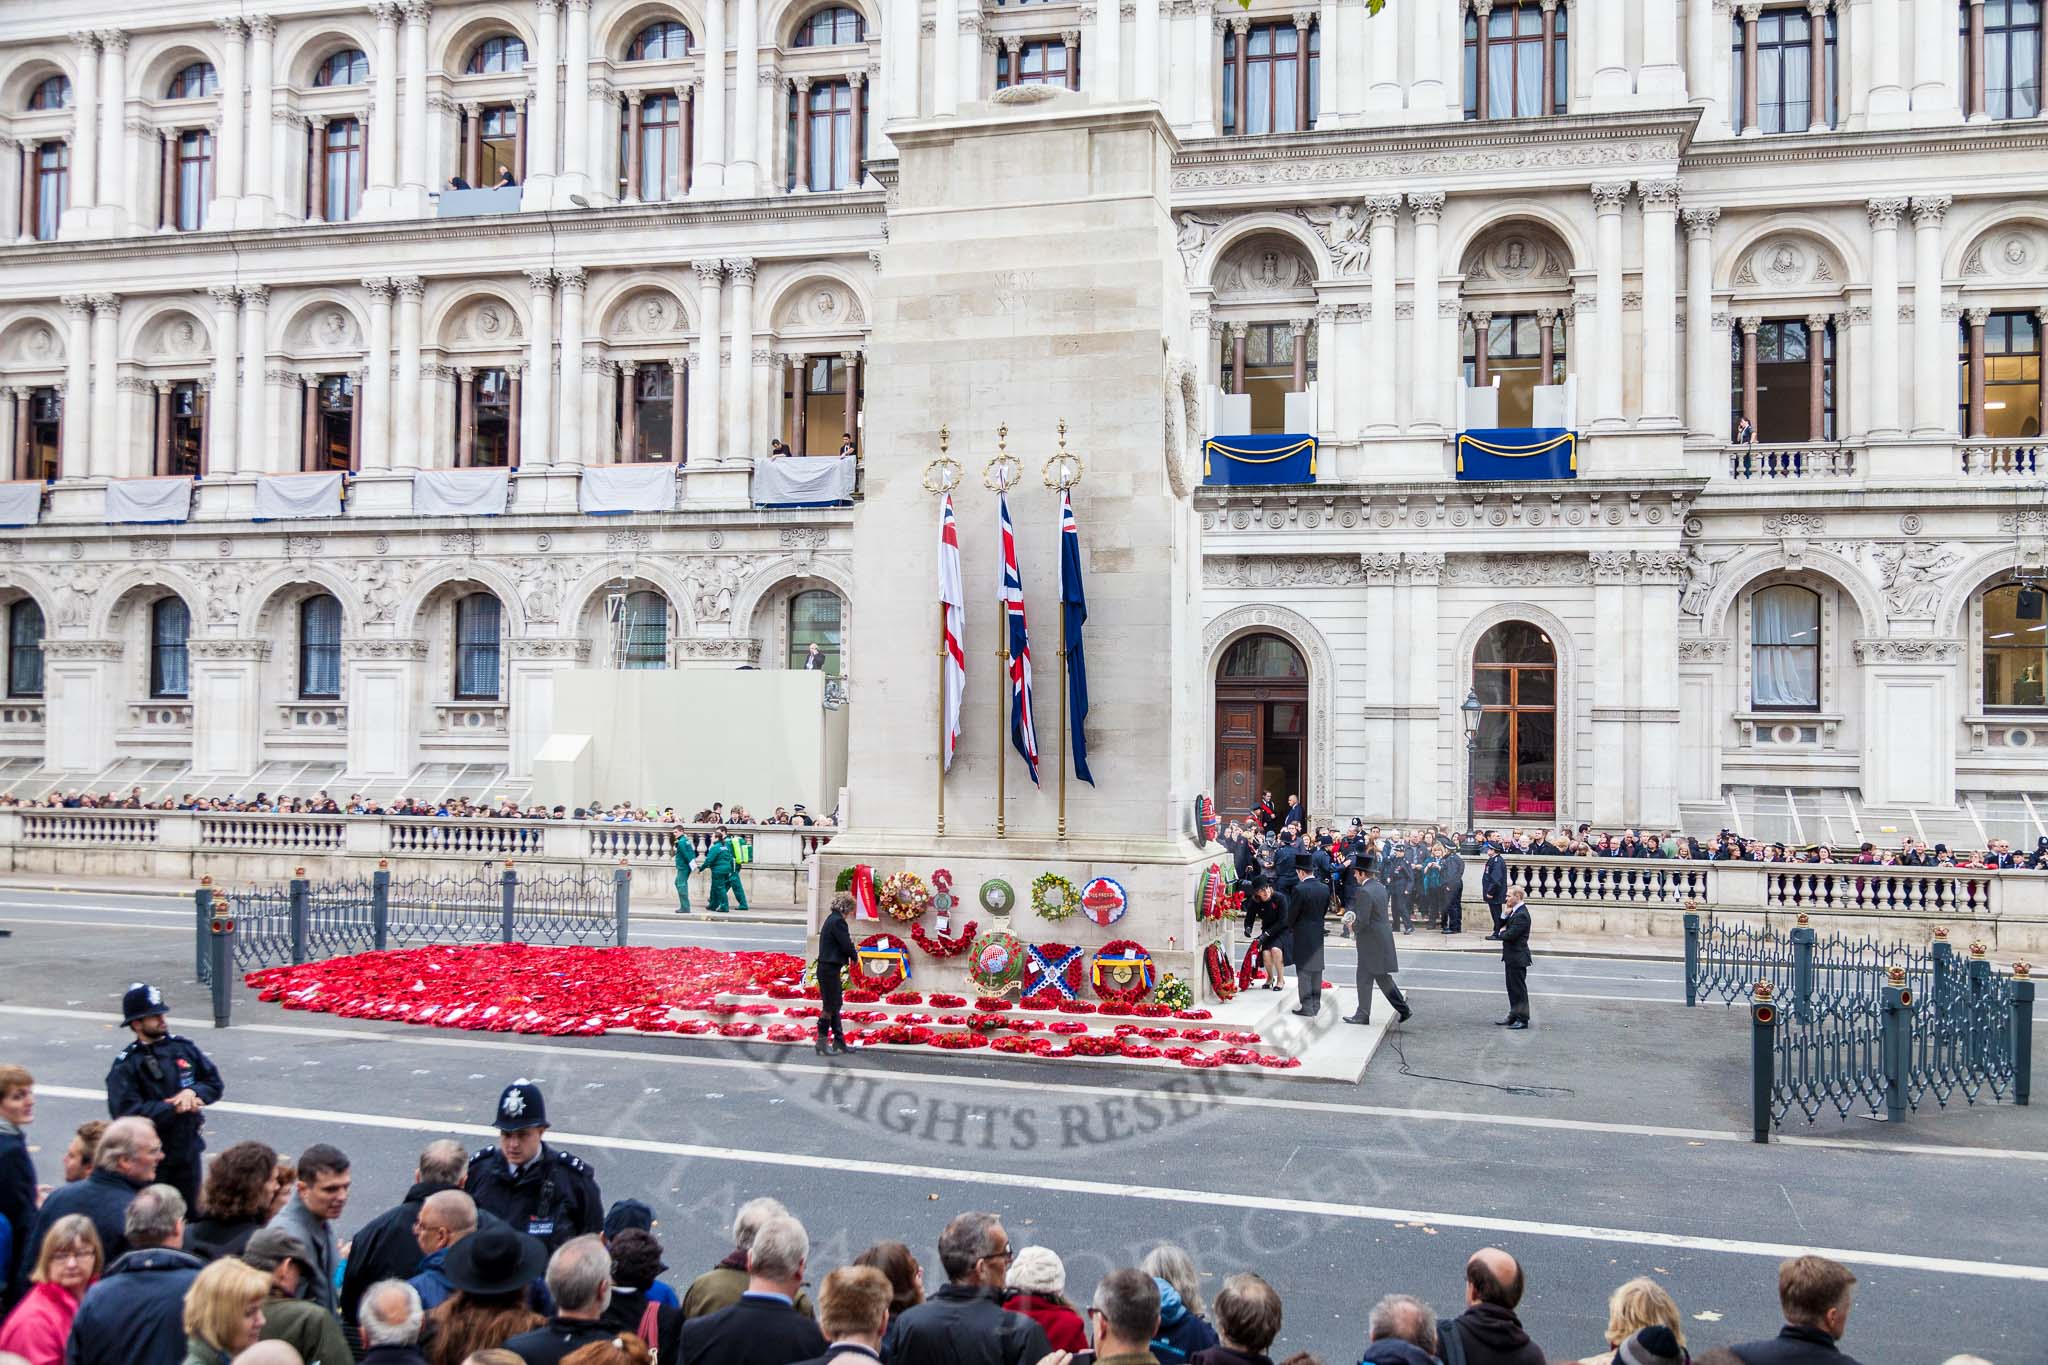 Remembrance Sunday at the Cenotaph 2015: After the event. The wreaths have been repositioned and  the fencing around the Cenotaph is set up. Image #379, 08 November 2015 12:54 Whitehall, London, UK